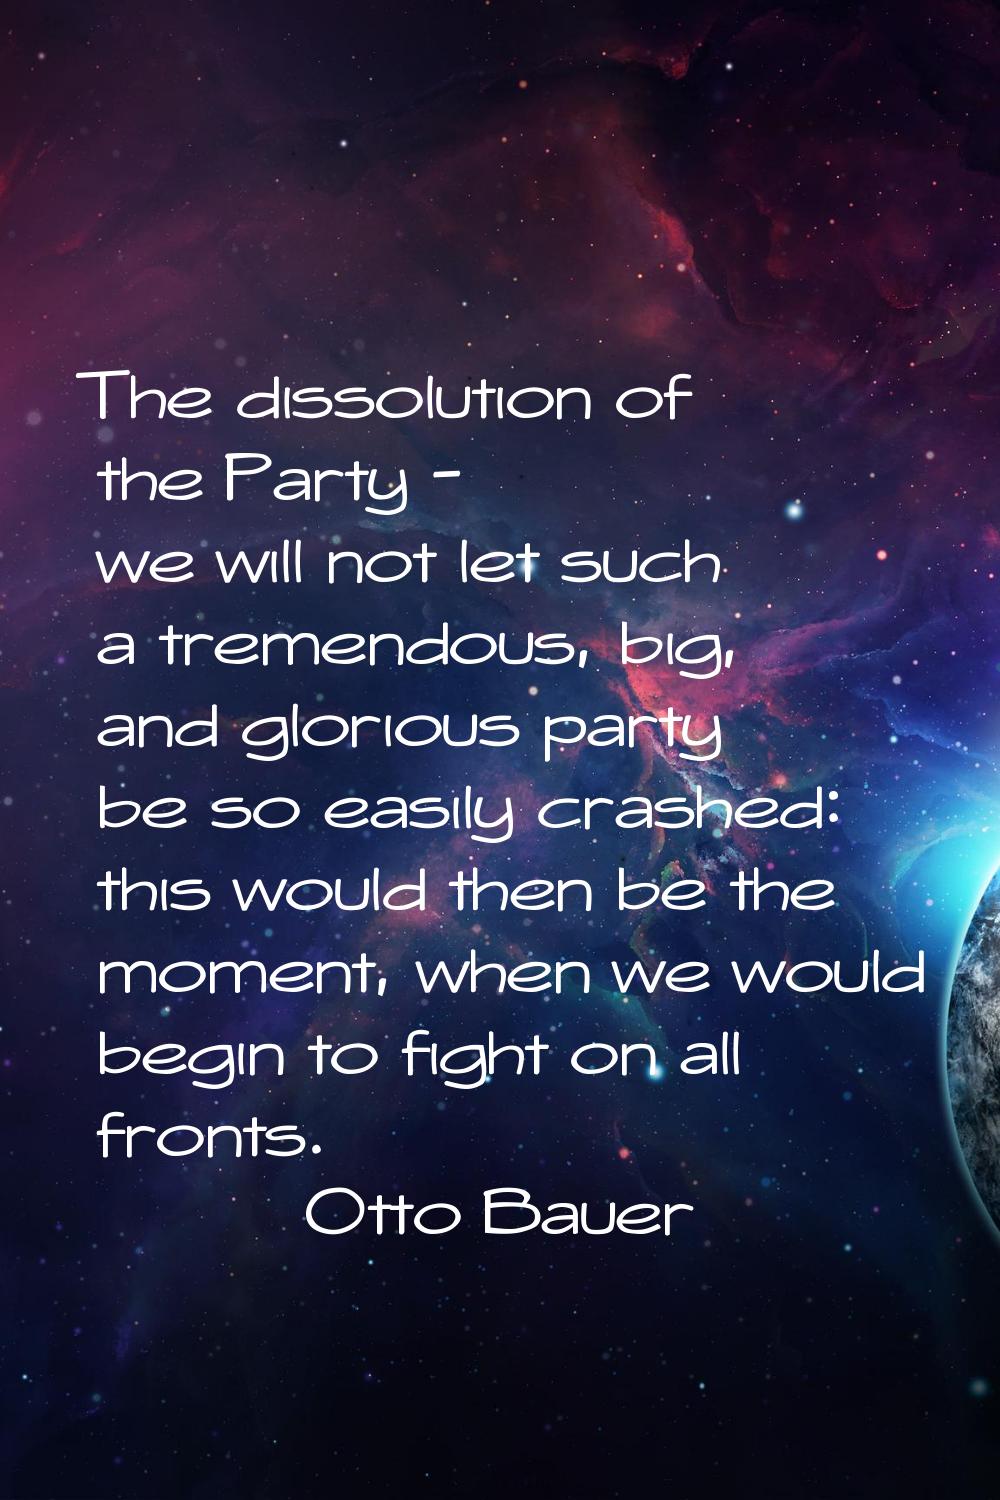 The dissolution of the Party - we will not let such a tremendous, big, and glorious party be so eas